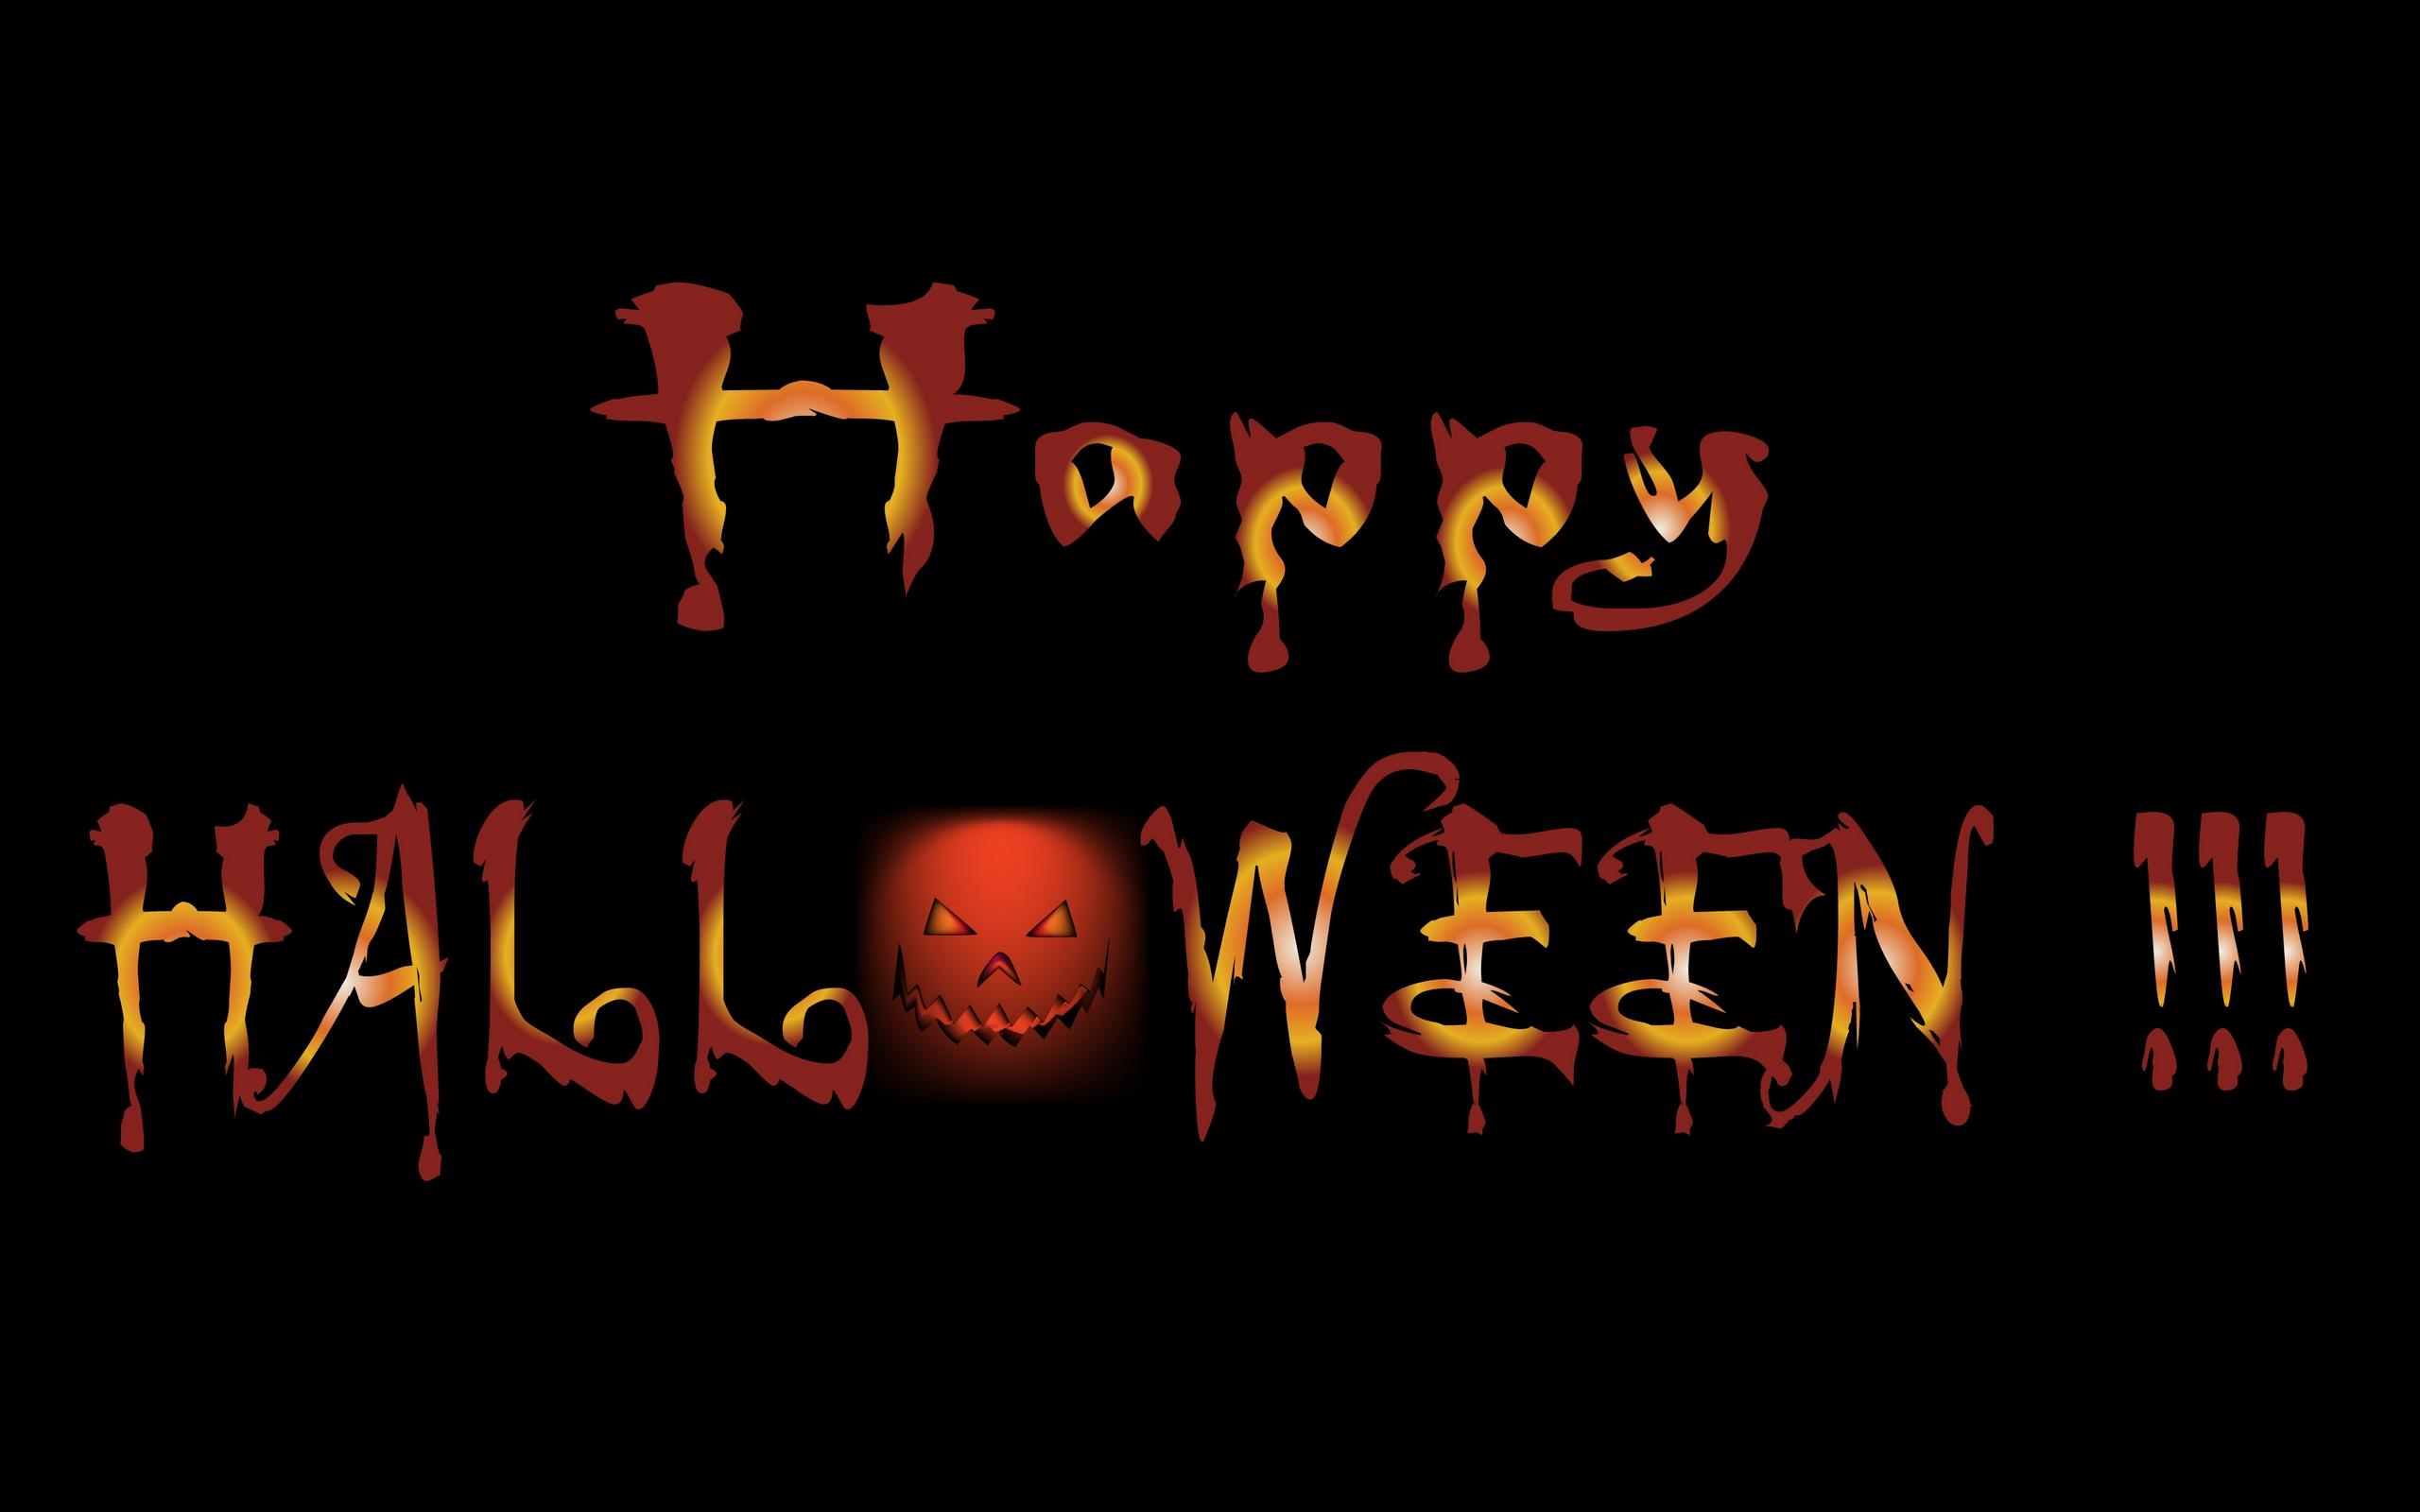 Happy Halloween 2018 Image, Quotes, Picture, Messages, Meme